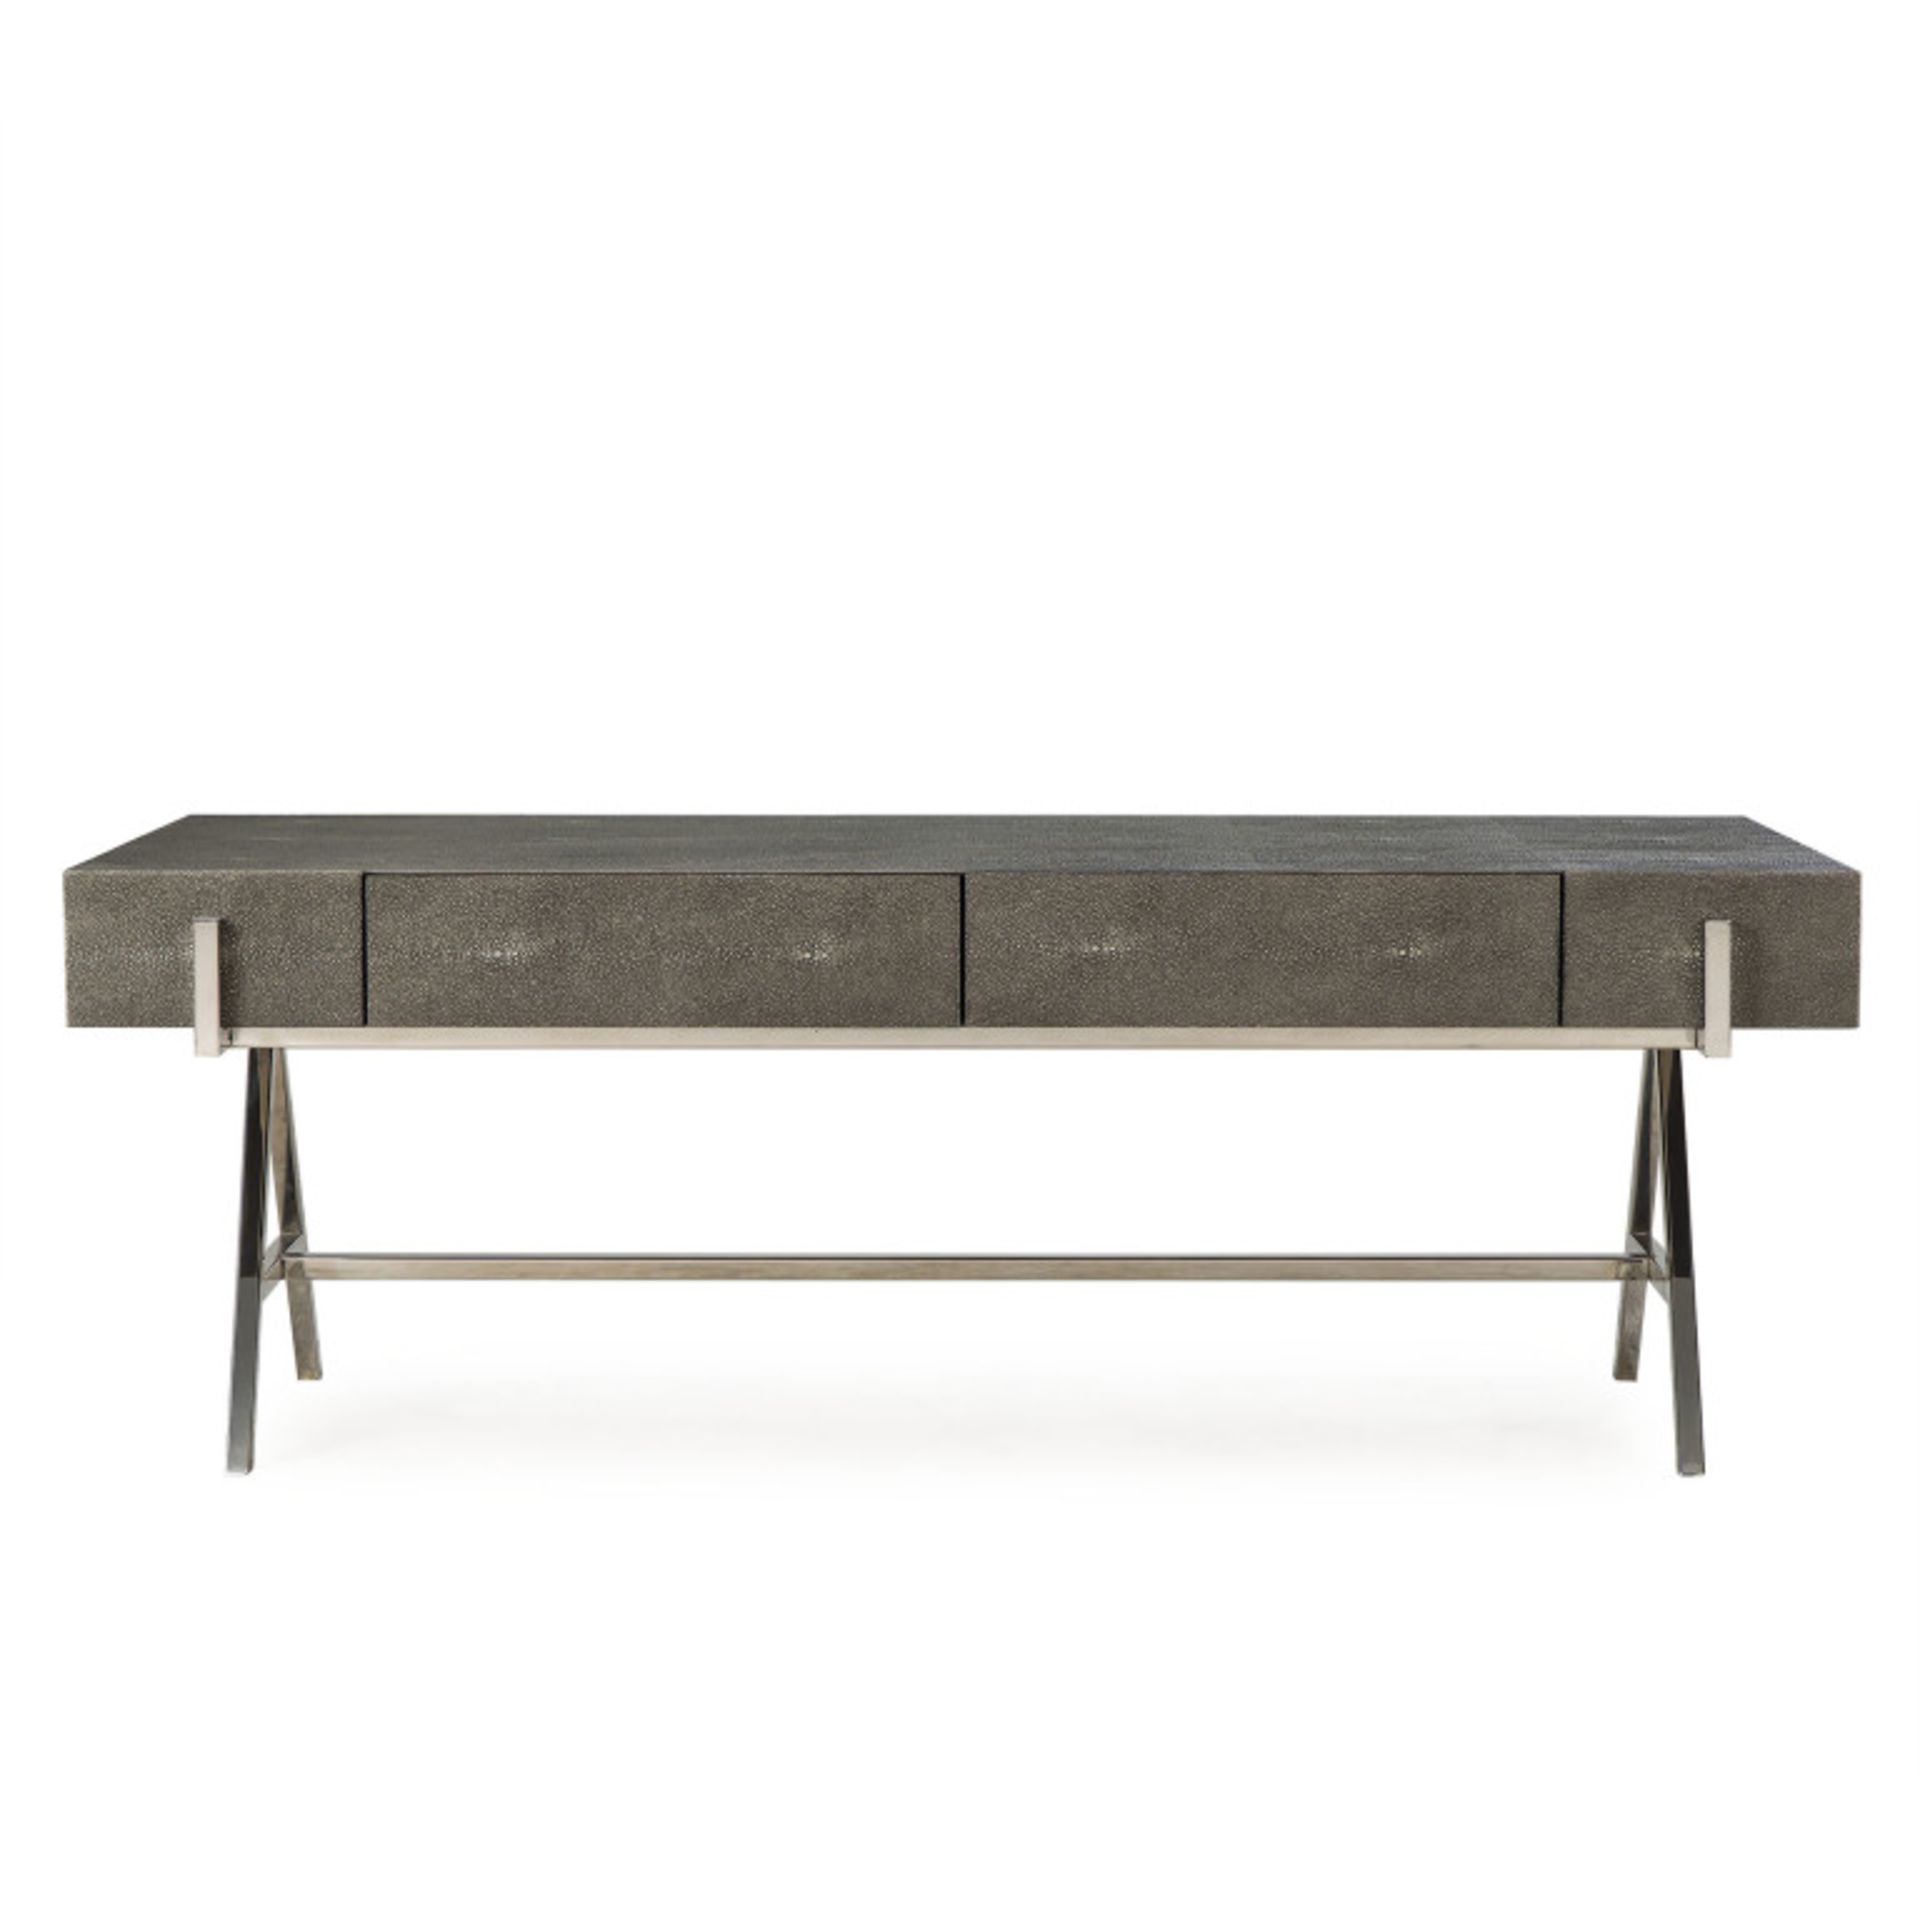 Coffee table- charcoal shagreen Constructed From Stainless Steel, Poplar Wood, Okoume Veneers And